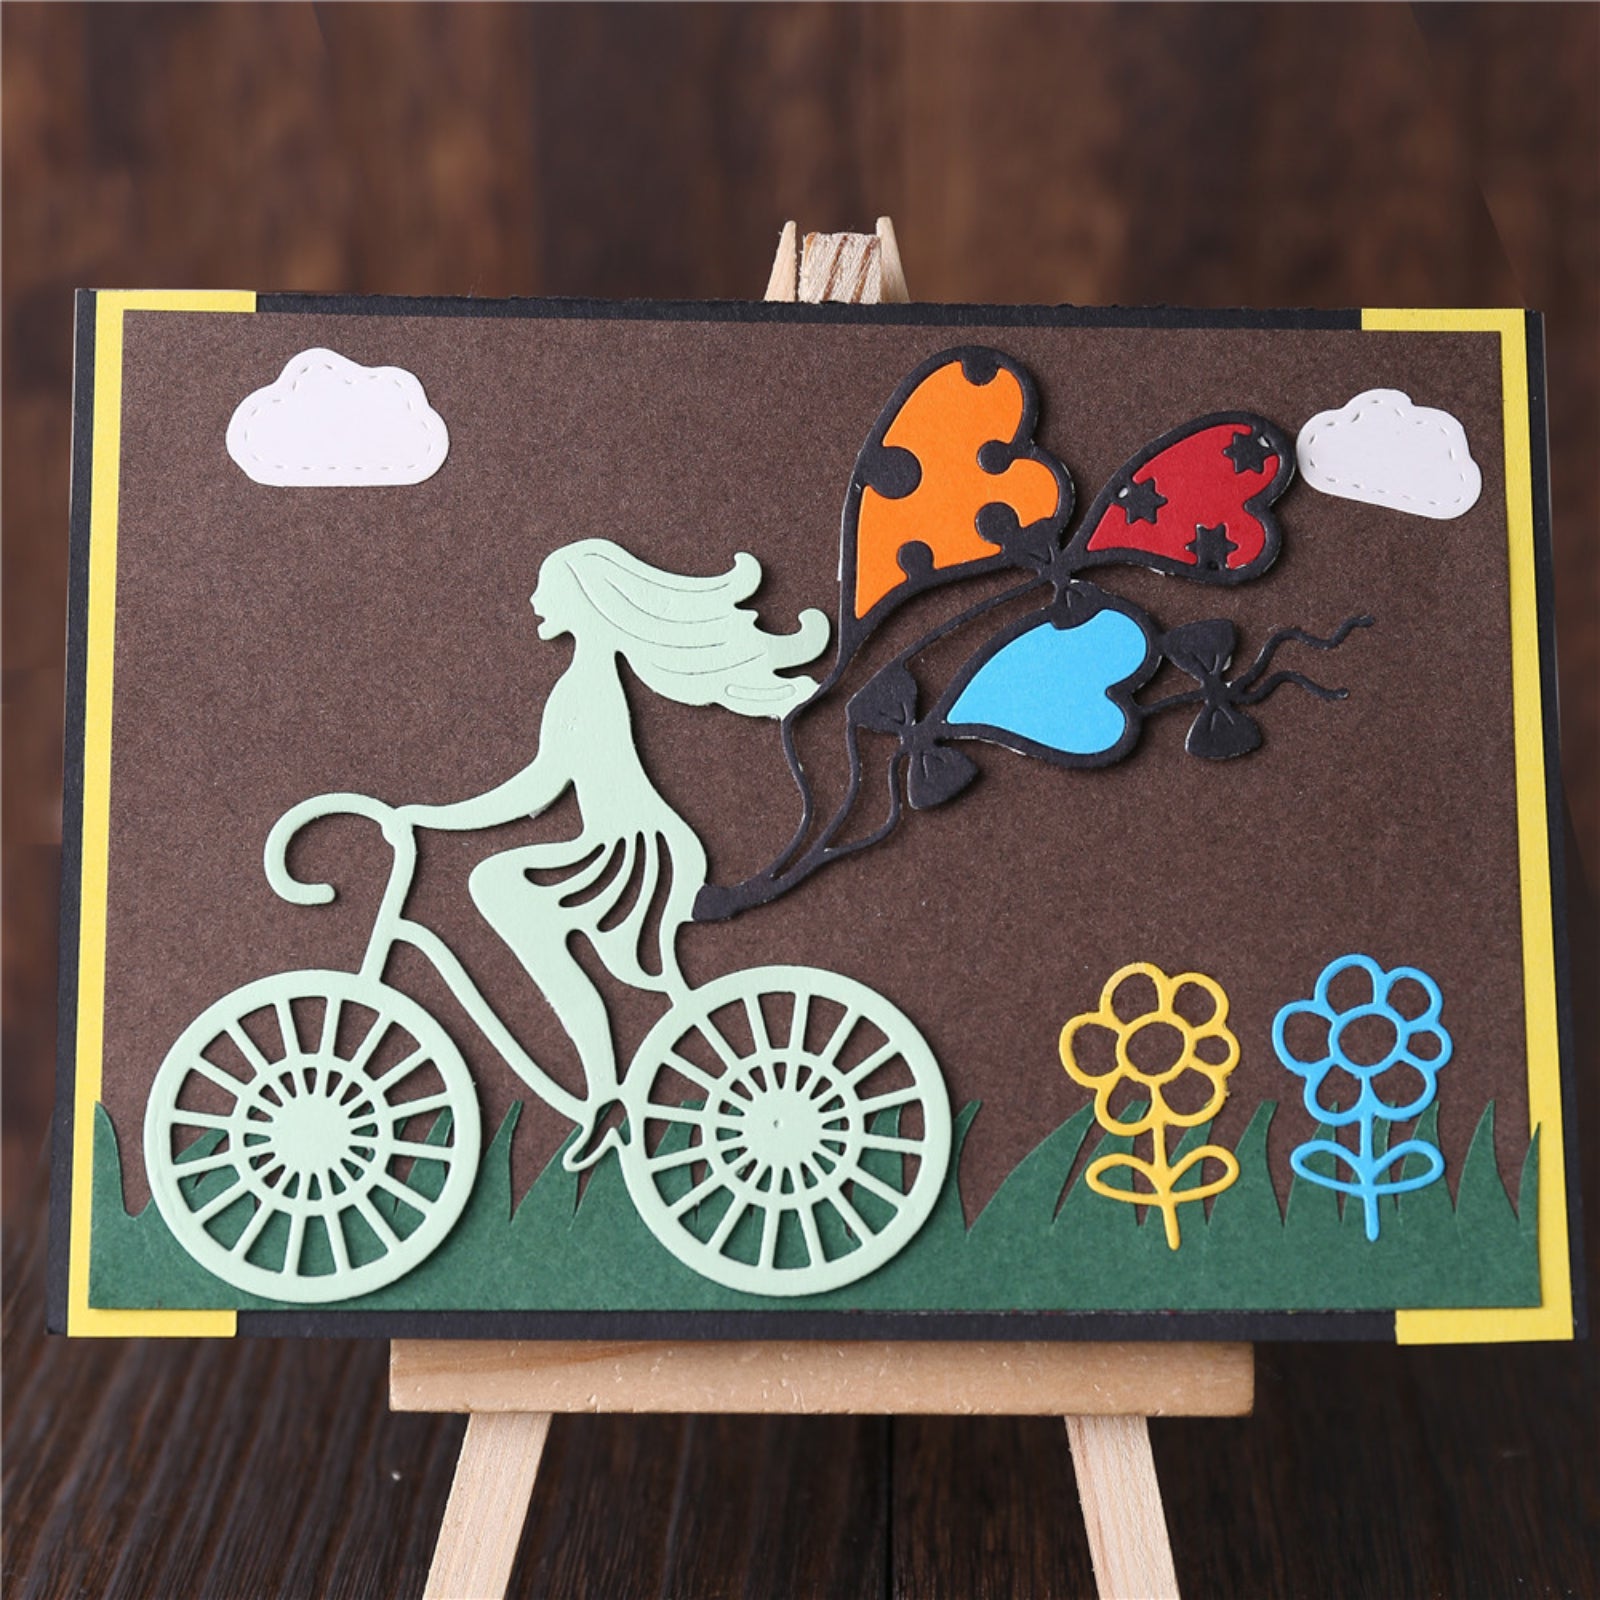 Lady Riding Bicycle w Heart Balloons Cutting Die